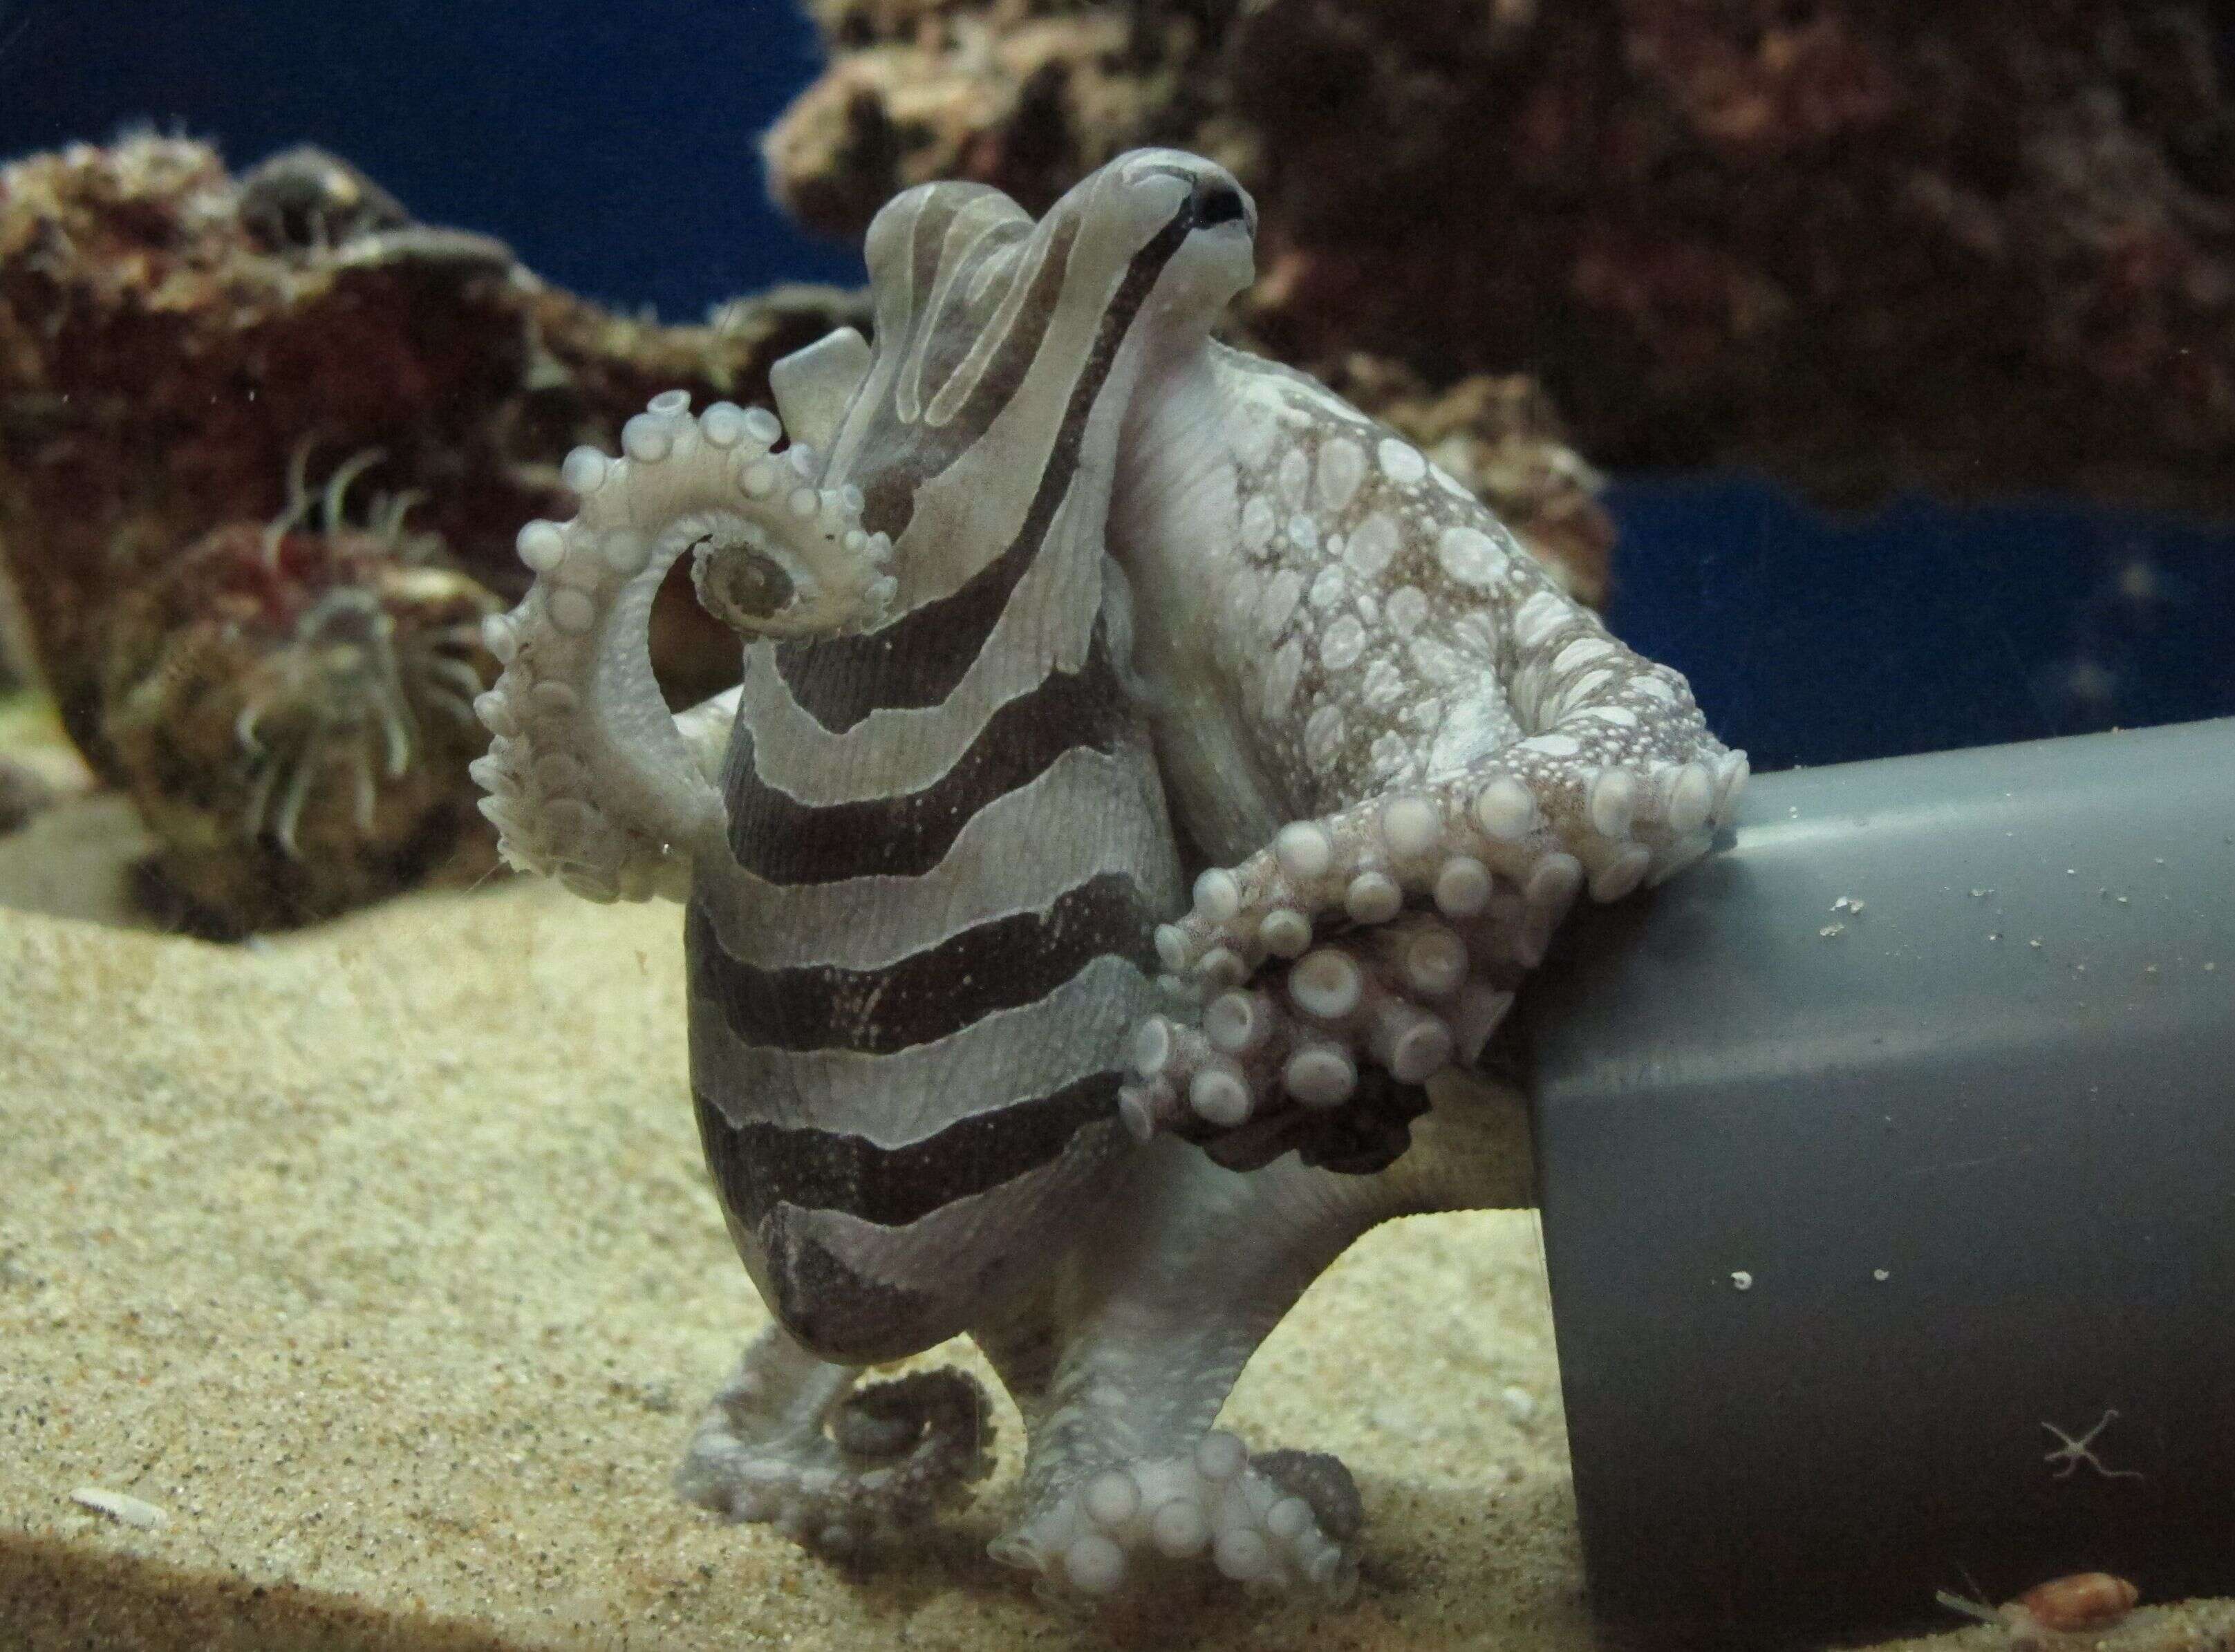 Image of rubble octopus